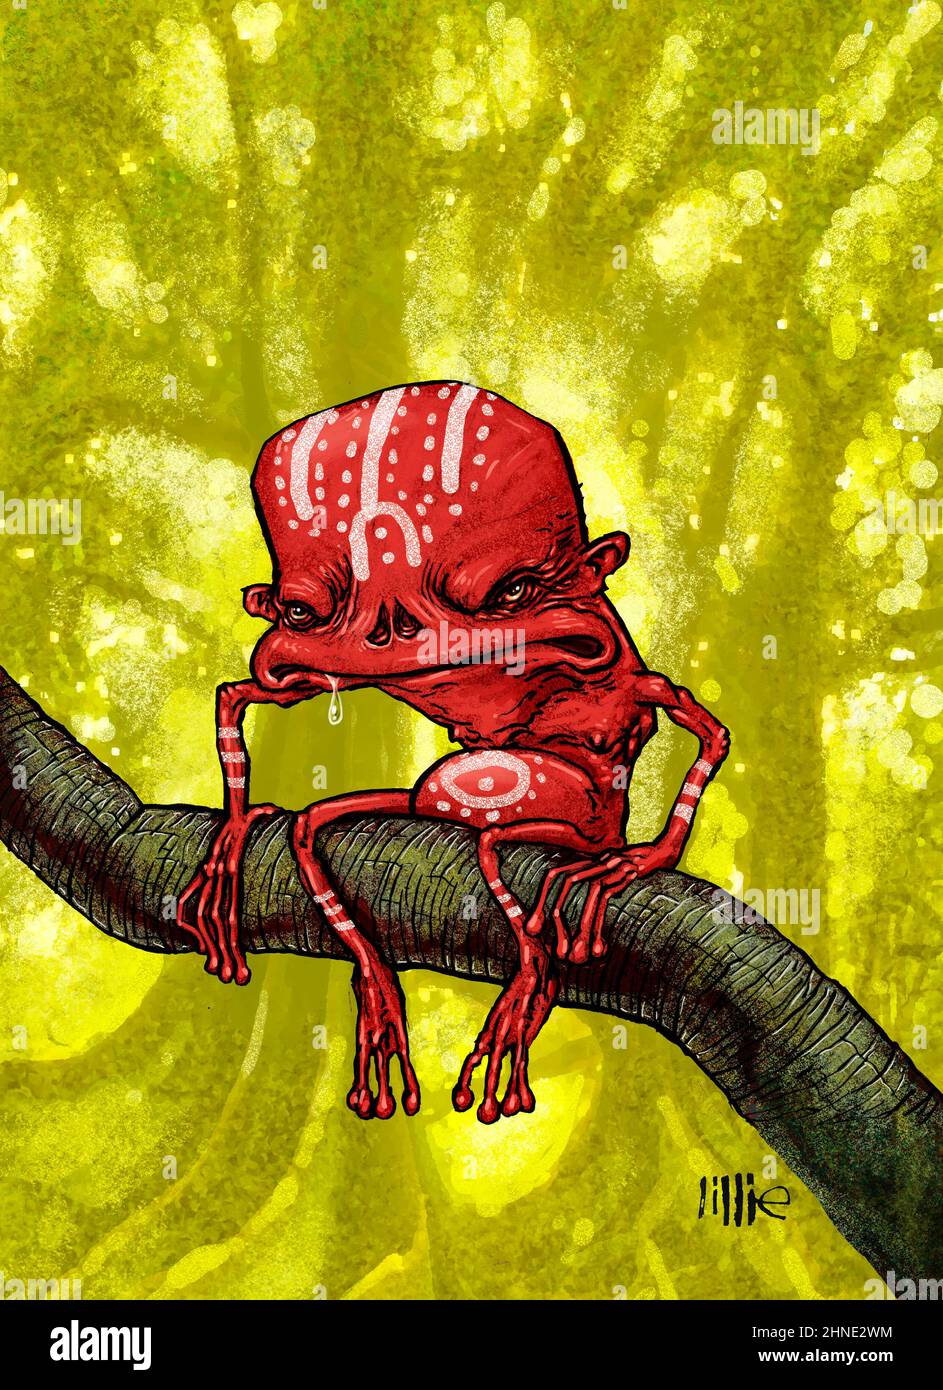 Art / illustration of a Yara-ma-yha-who, a legendary creature found in Australian Aboriginal mythology. The red, frog-like monster lives in fiig trees Stock Photo